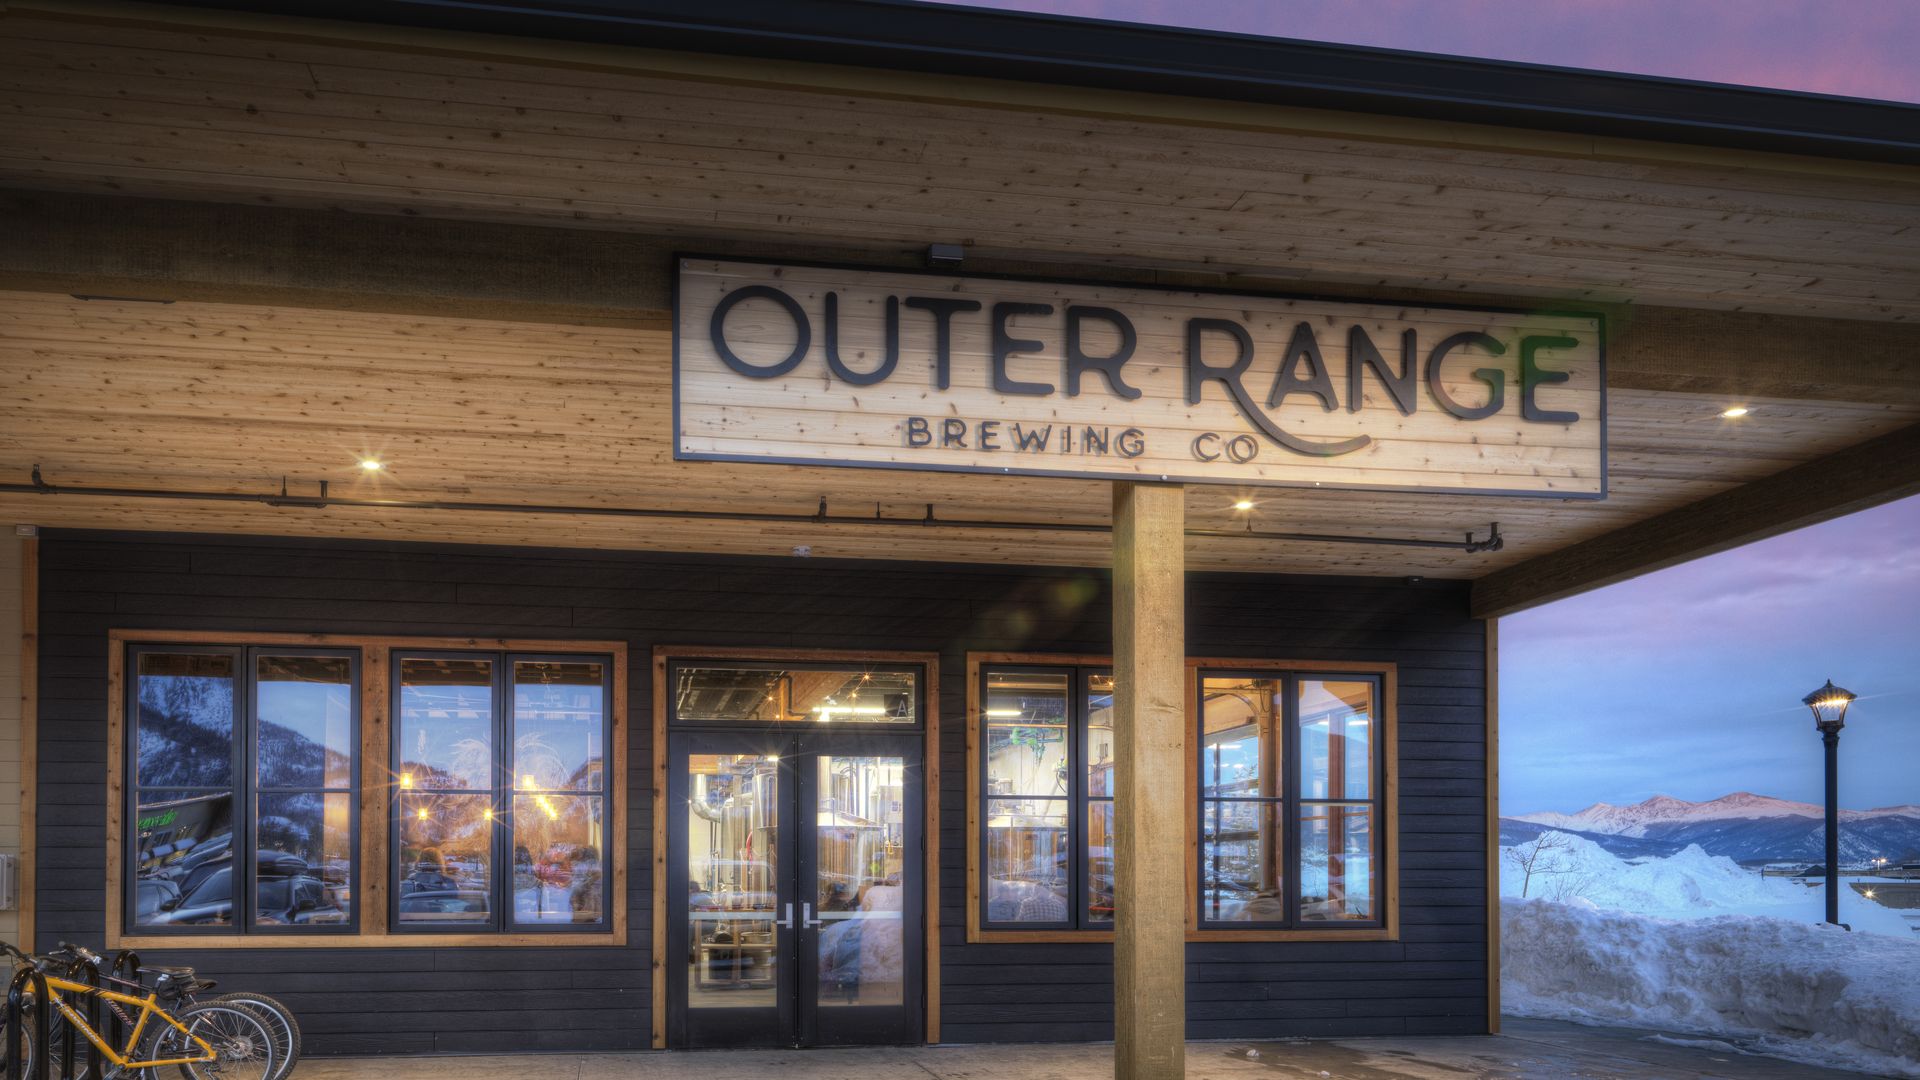 Outer Range's brewery in Frisco. Photo courtesy of Outer Range